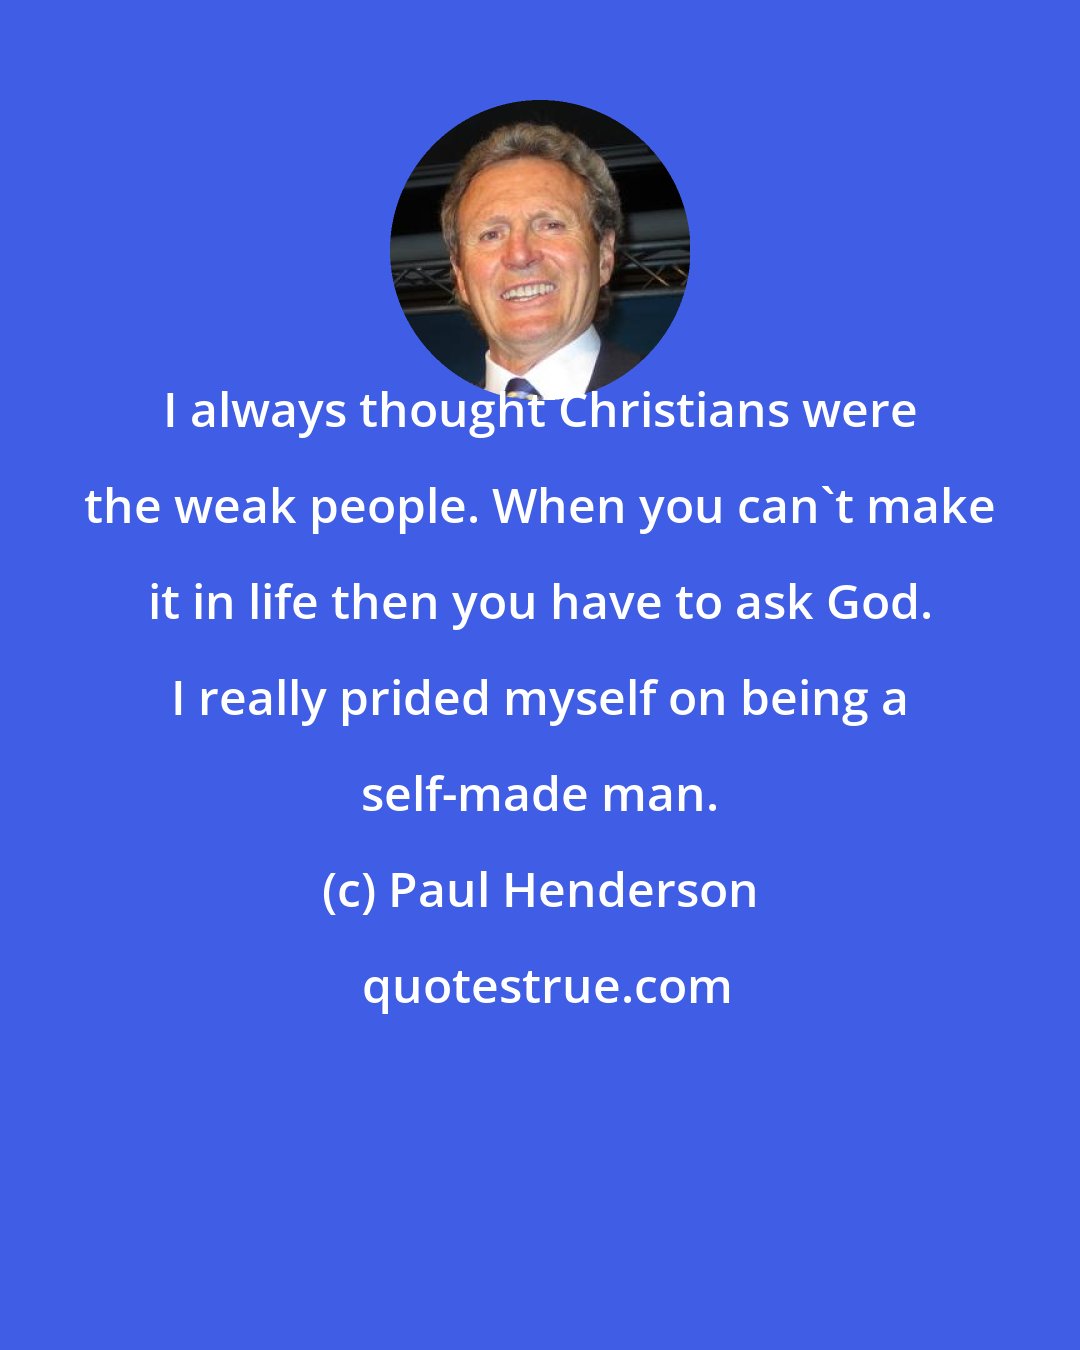 Paul Henderson: I always thought Christians were the weak people. When you can't make it in life then you have to ask God. I really prided myself on being a self-made man.